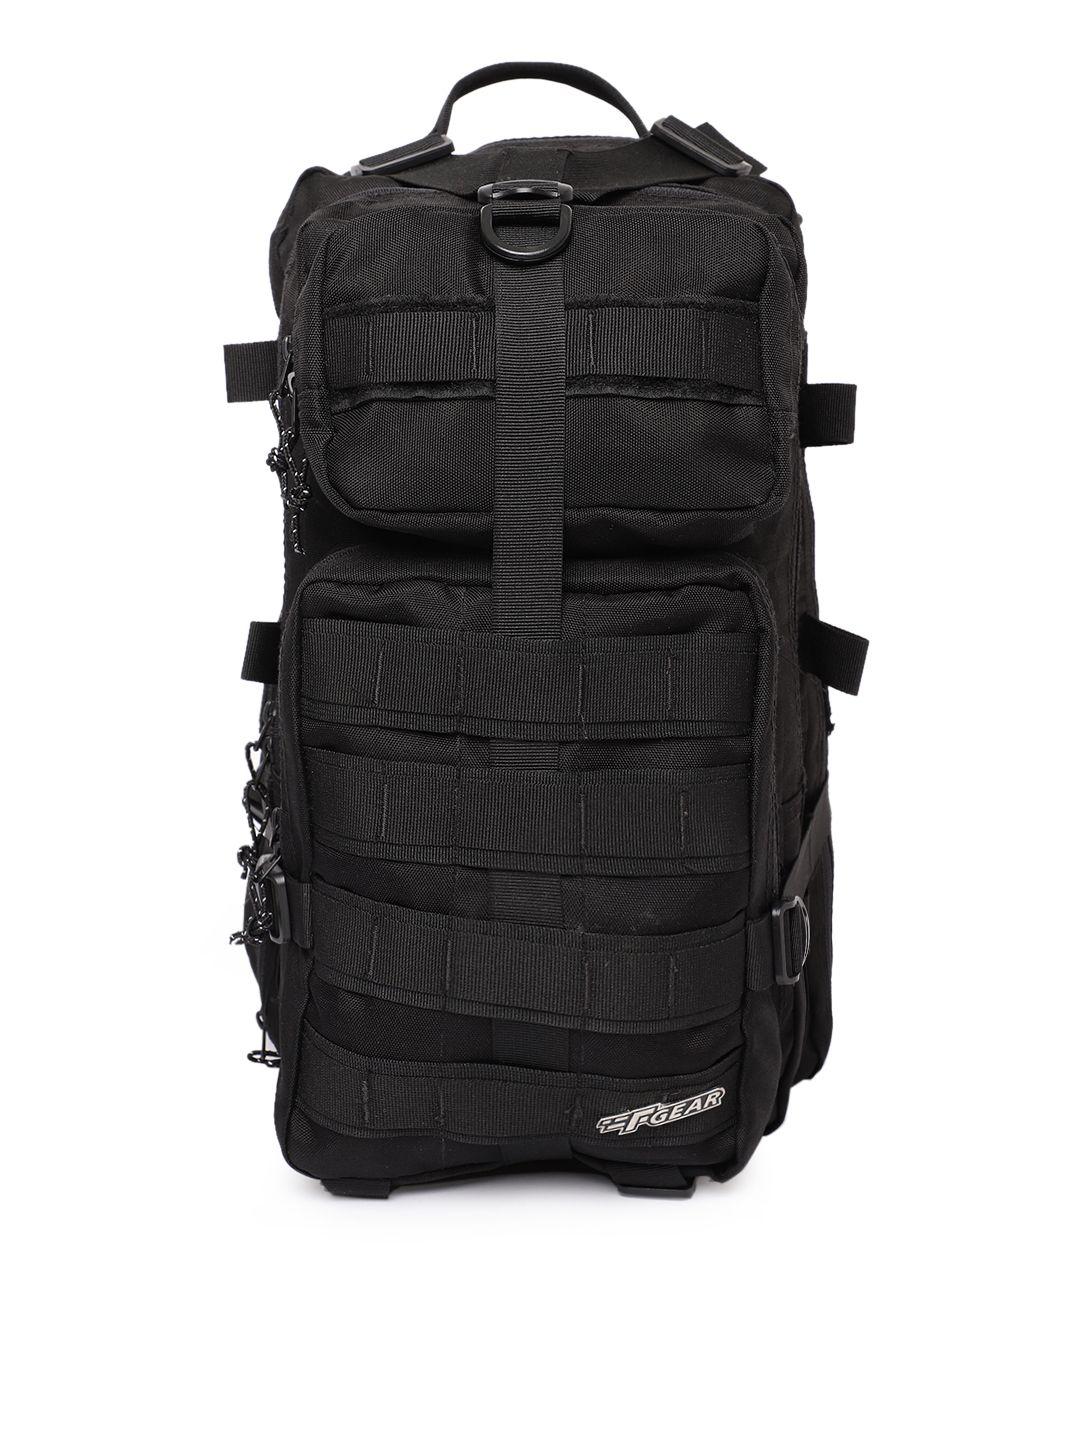 f gear unisex black military tactical solid backpack